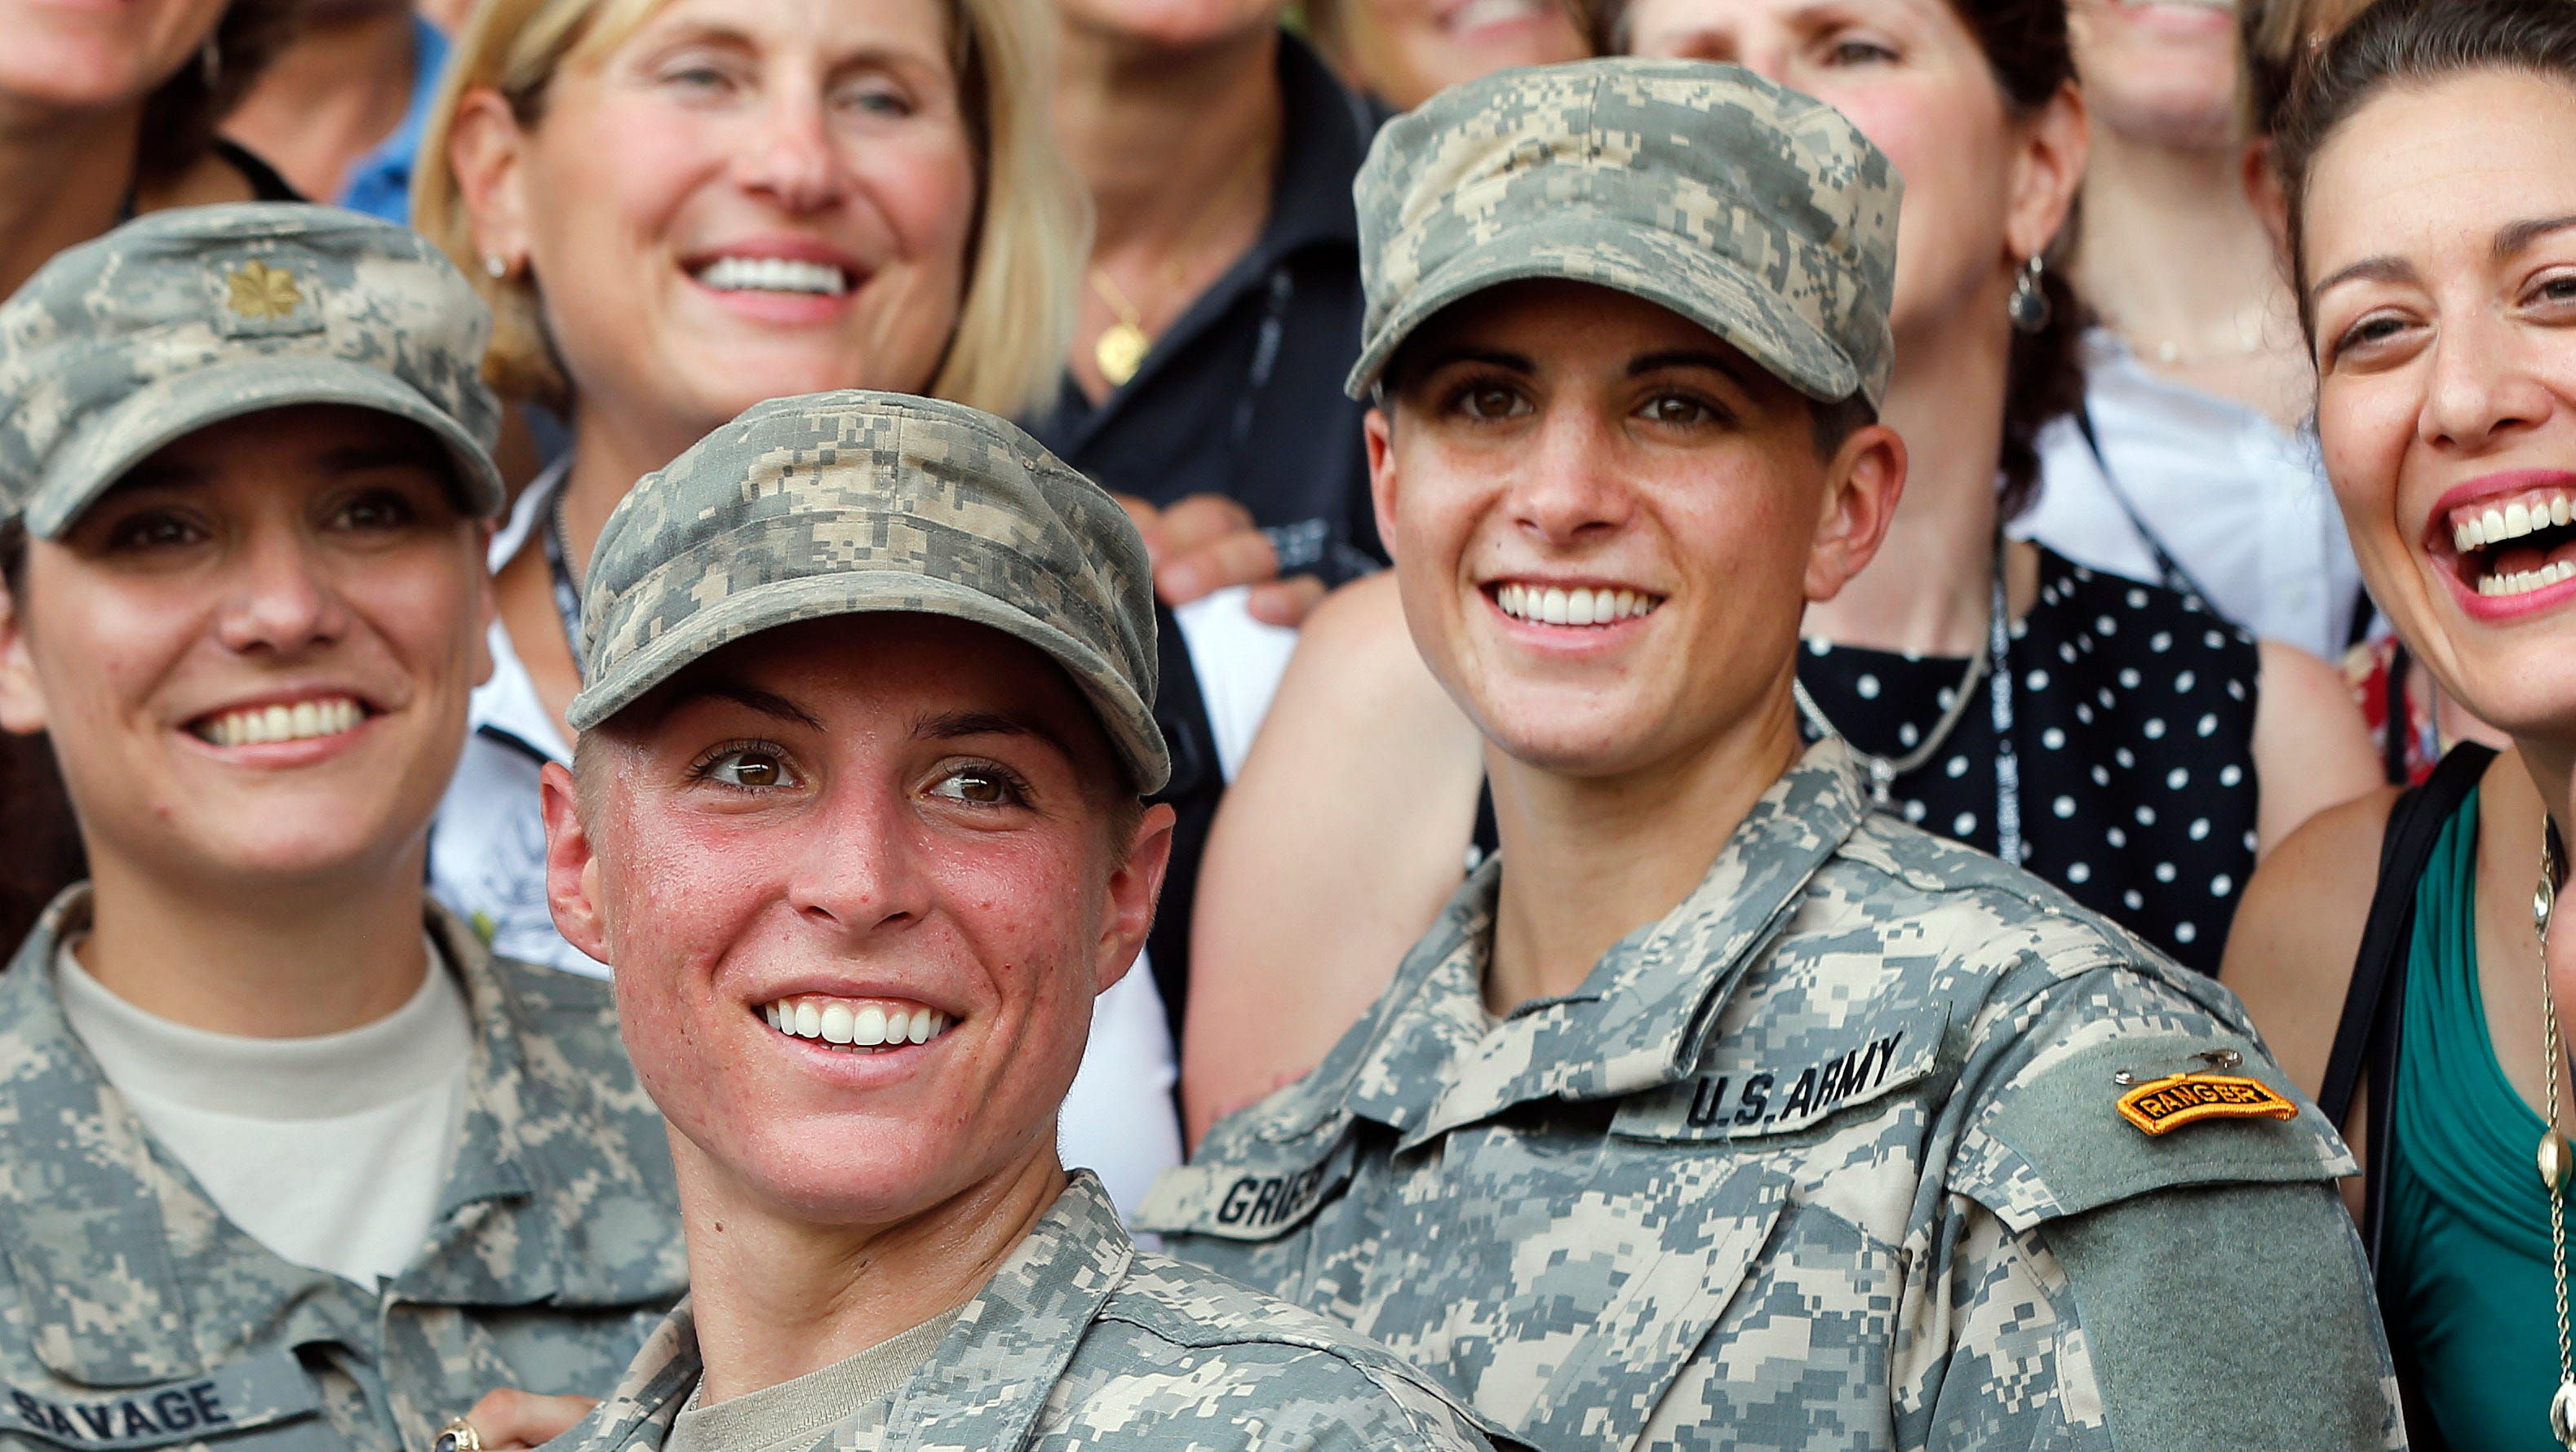 Military draft Should women have to register for draft?